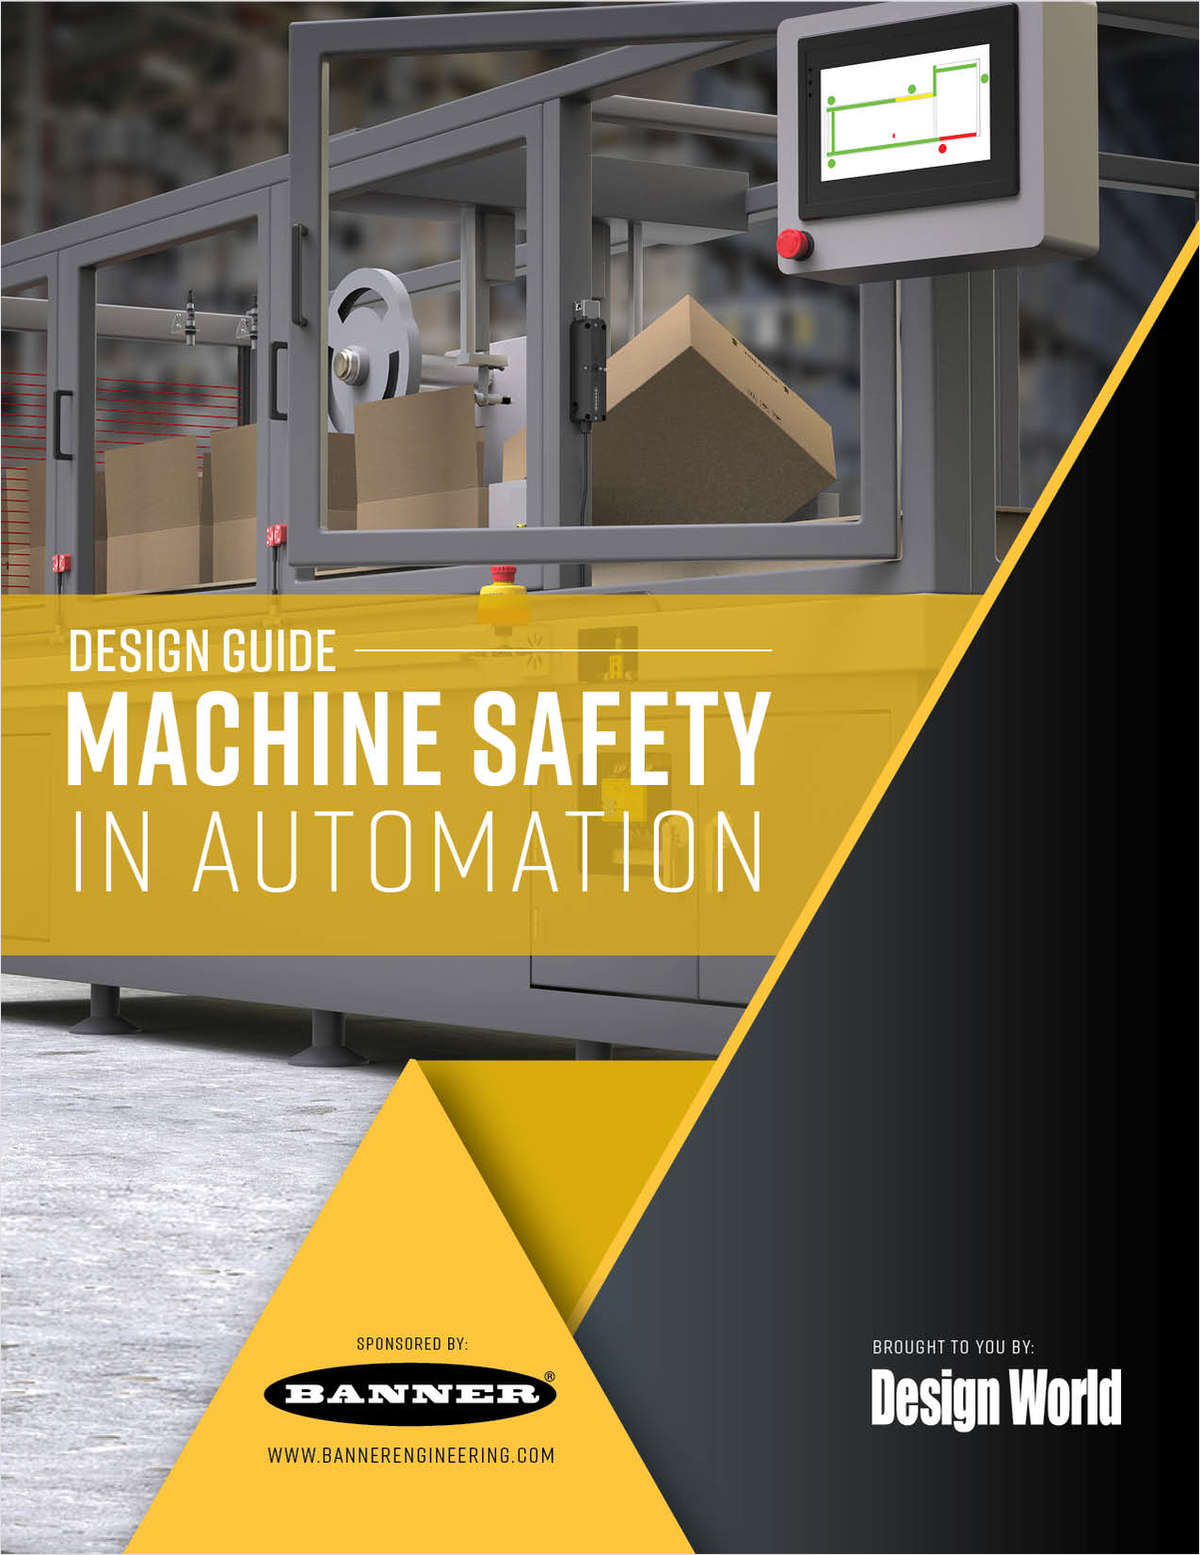 Design Guide: Machine Safety in Automation